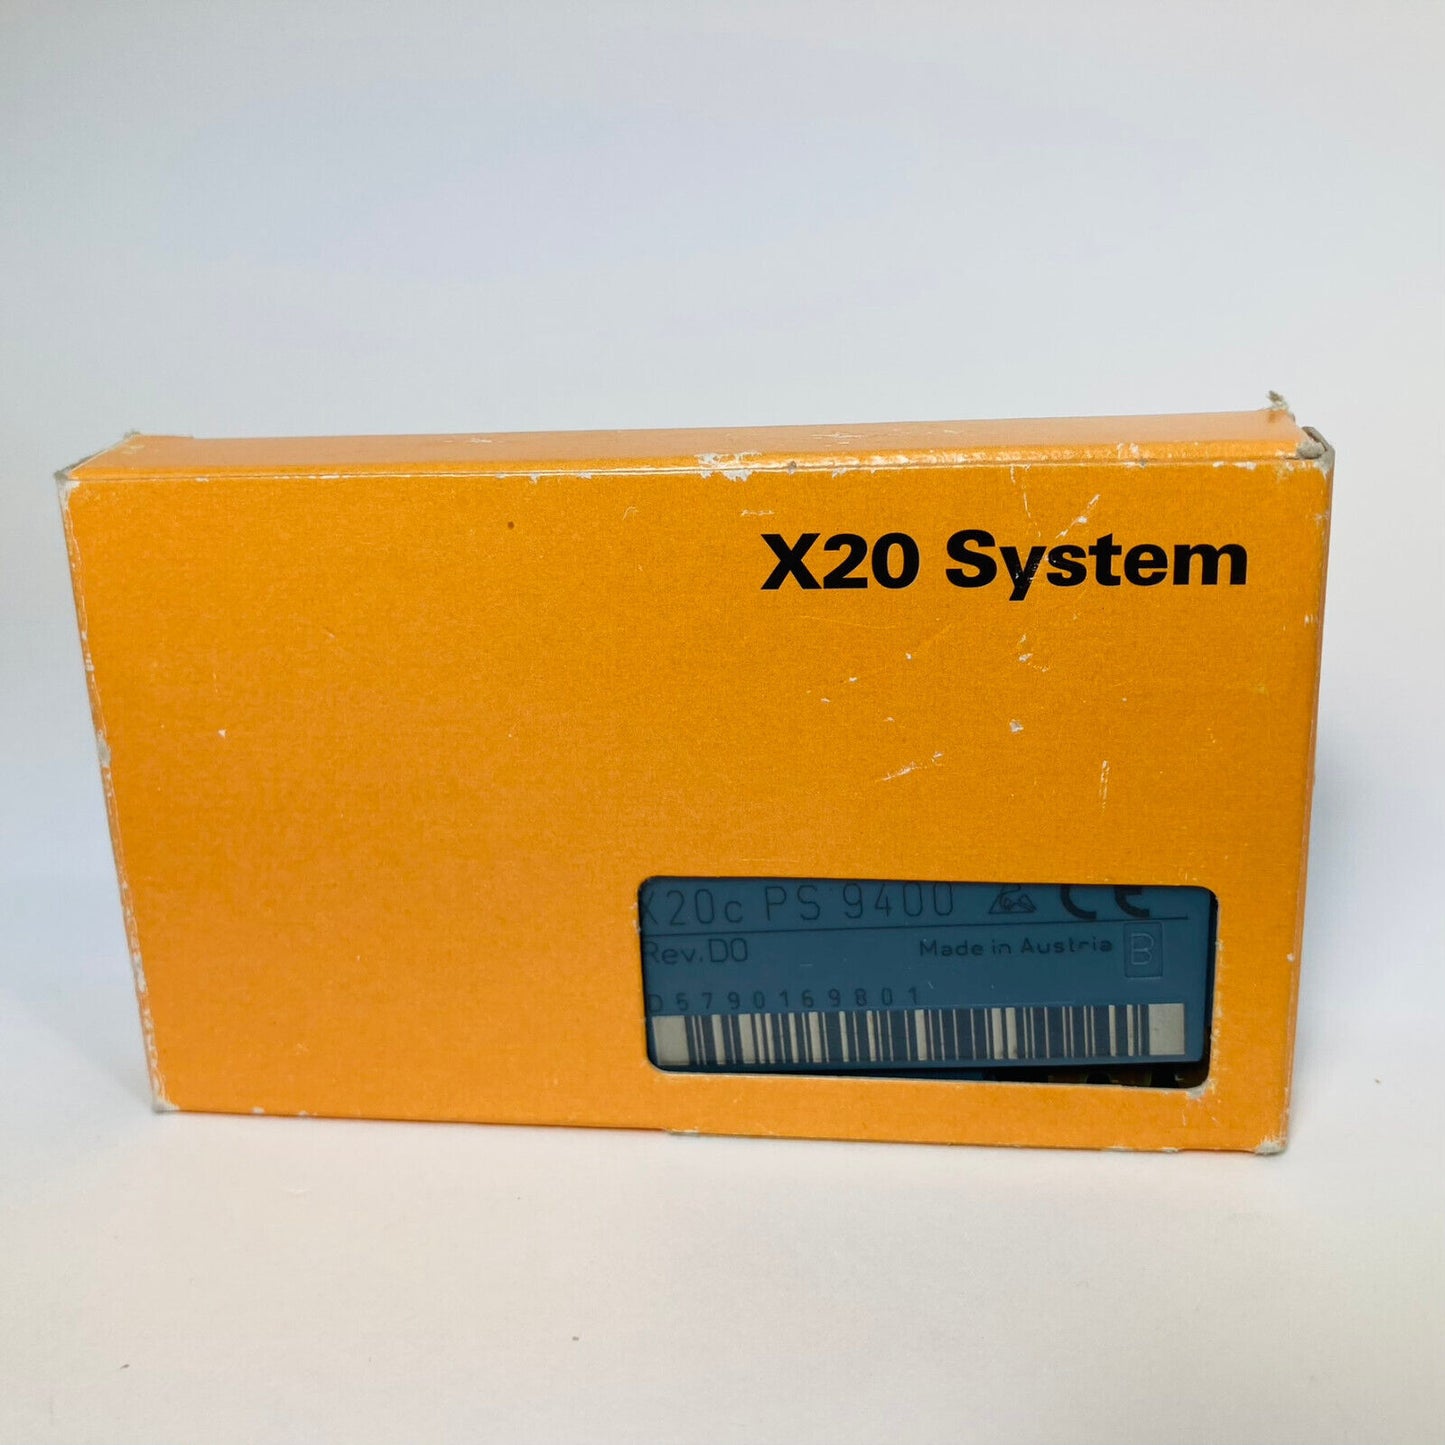 New B&R X20CPS9400 / X20c PS 9400 / Power Supply Service Interface